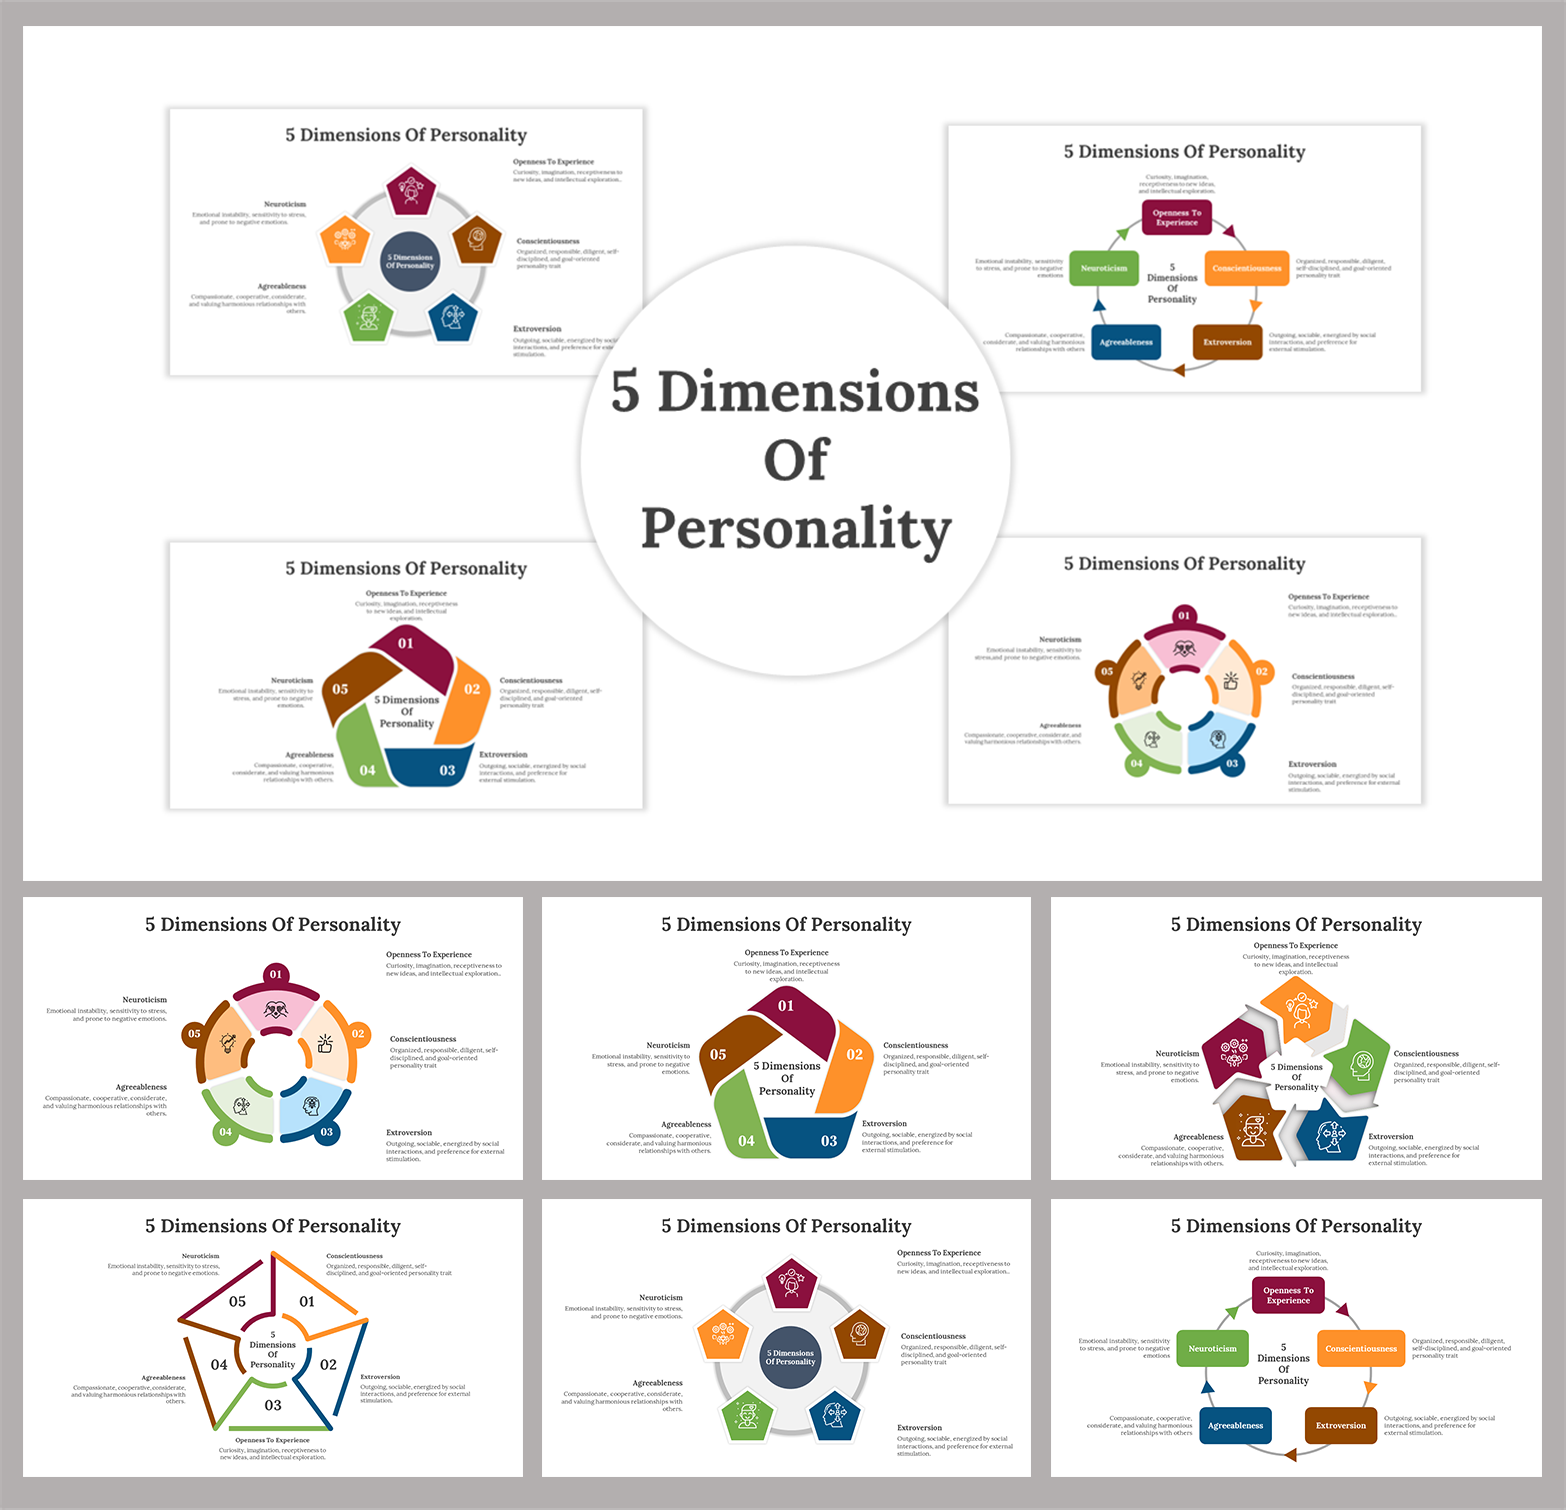 write an essay about yourself based on the dimensions of one's personality